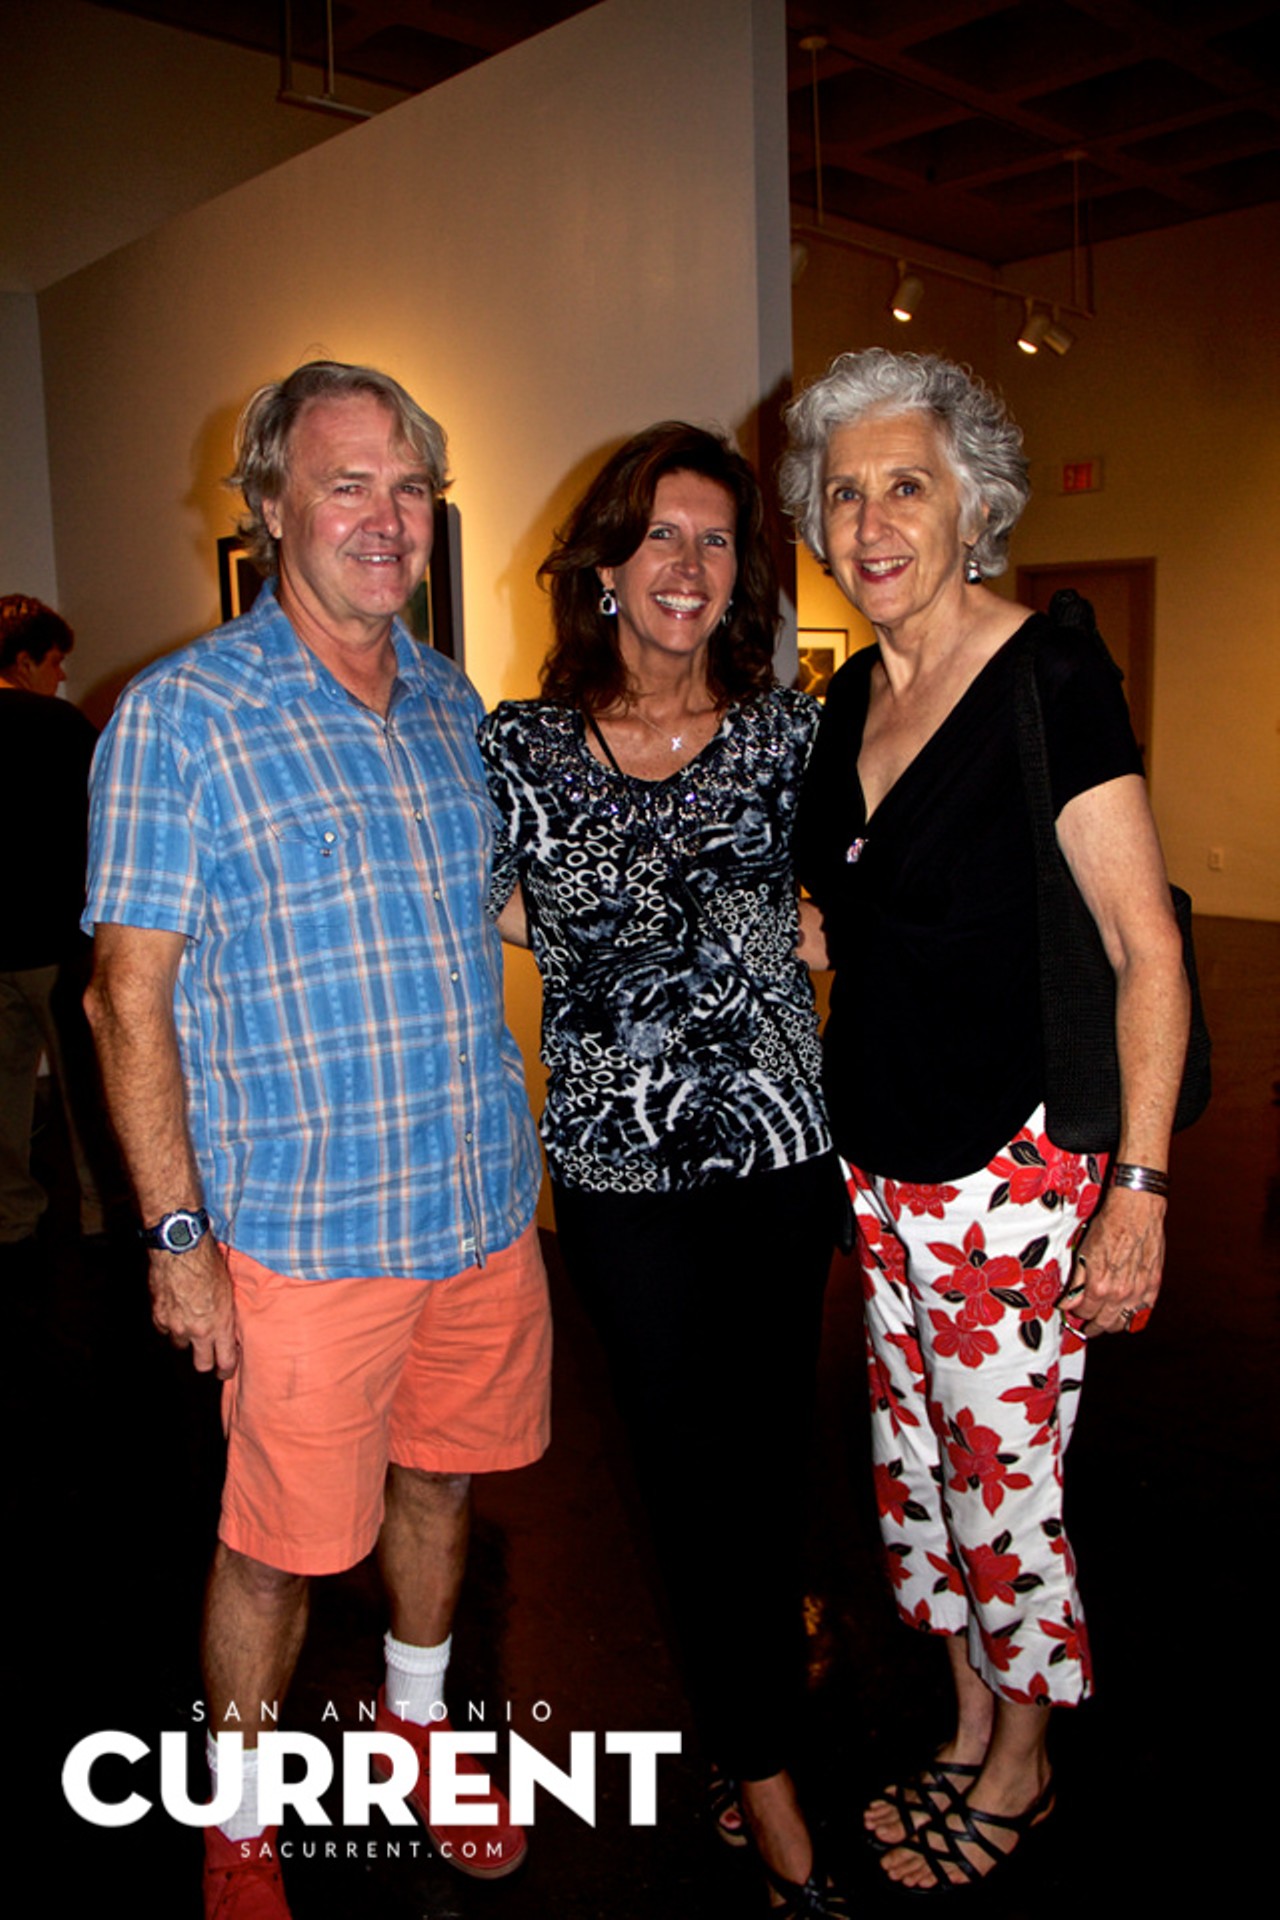 25 Photos of the 'Altering Space' Opening at Southwest School of Art